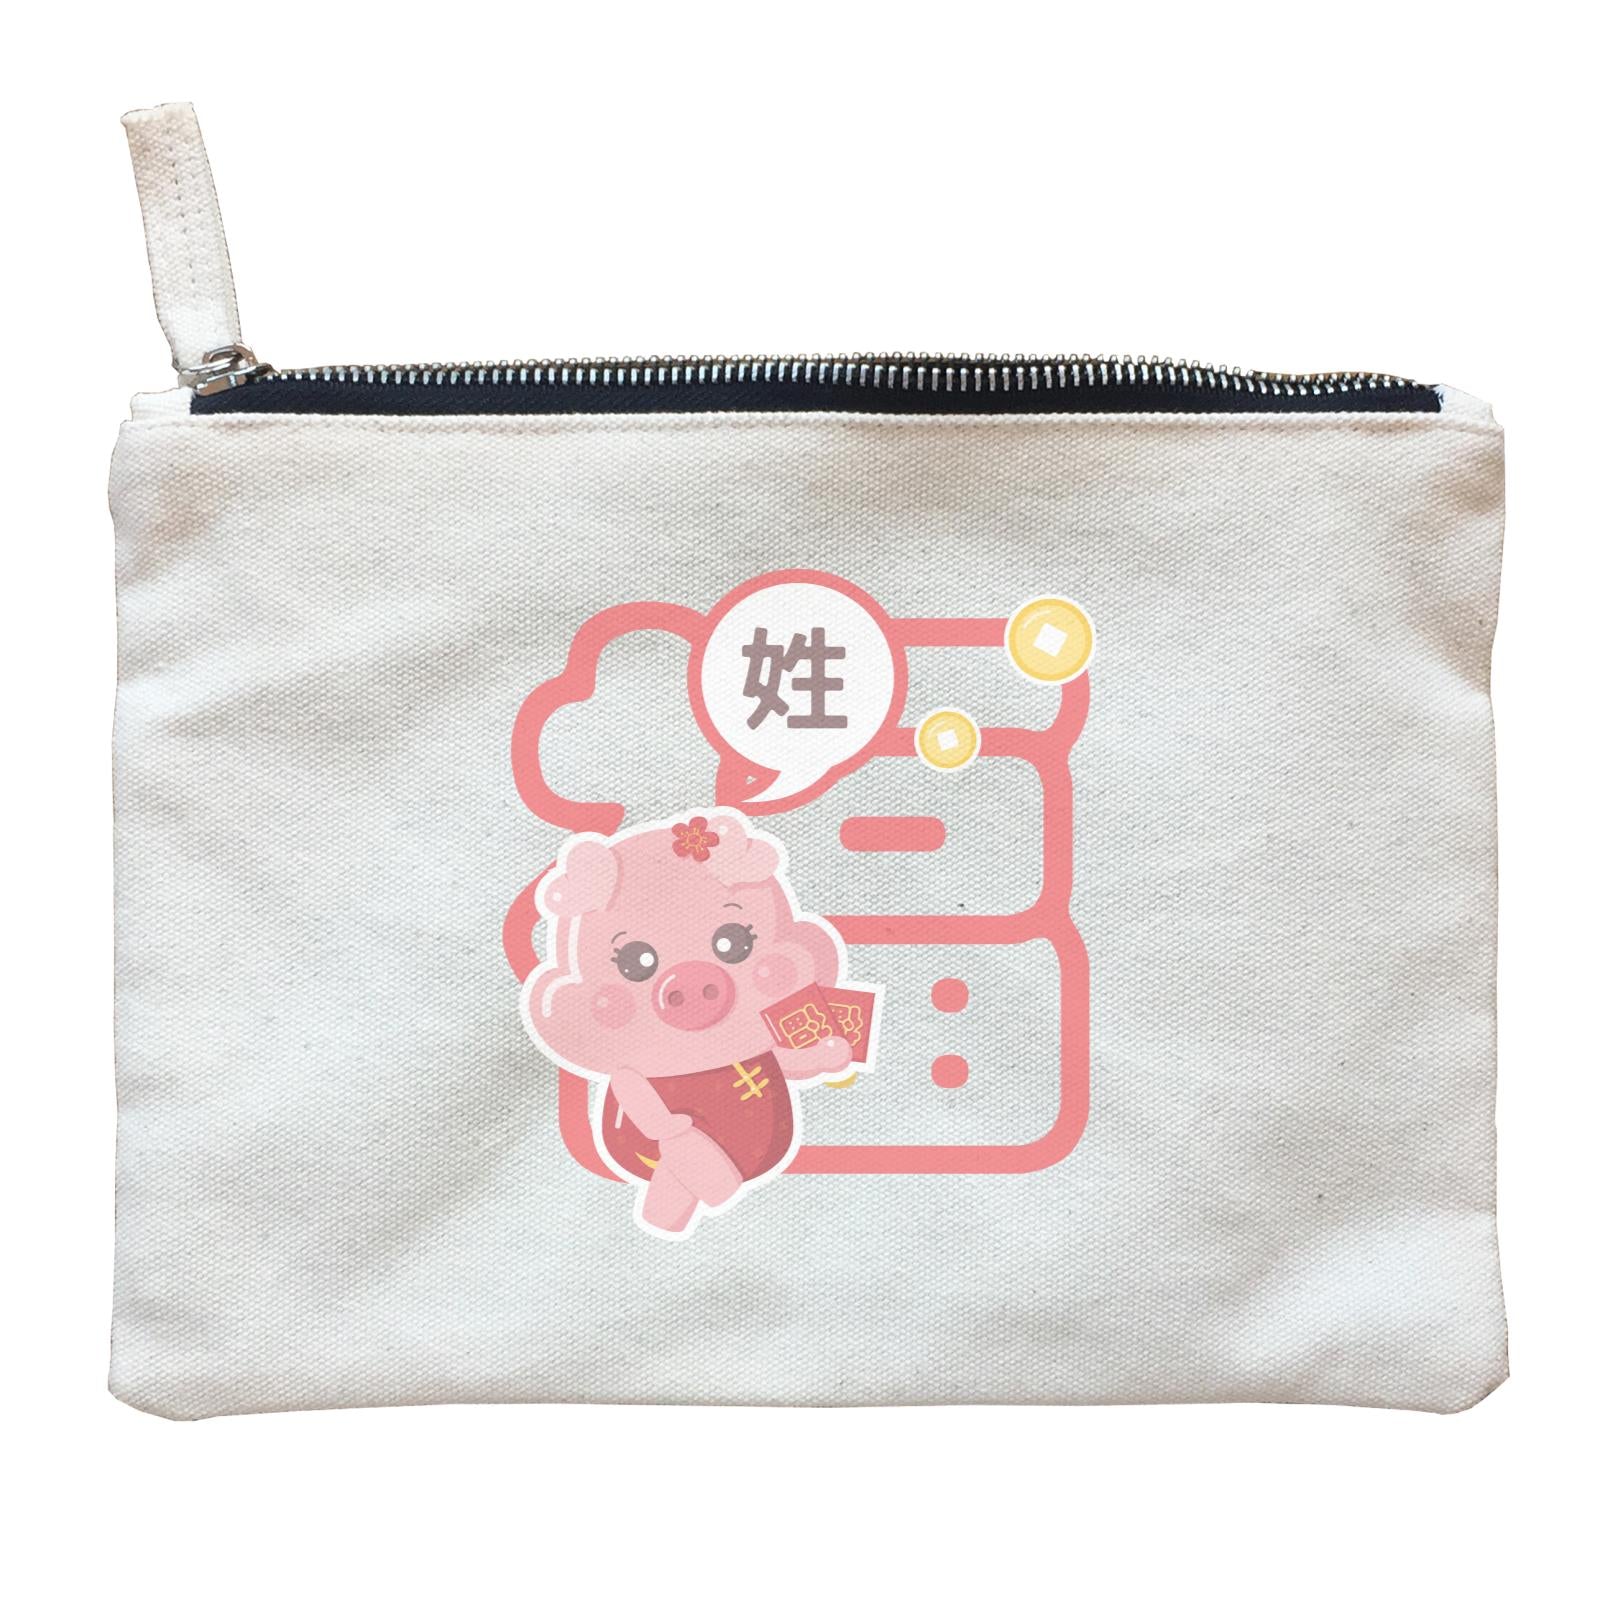 Chinese New Year Cute Pig Good Fortune Girl Accessories With Addname Zipper Pouch